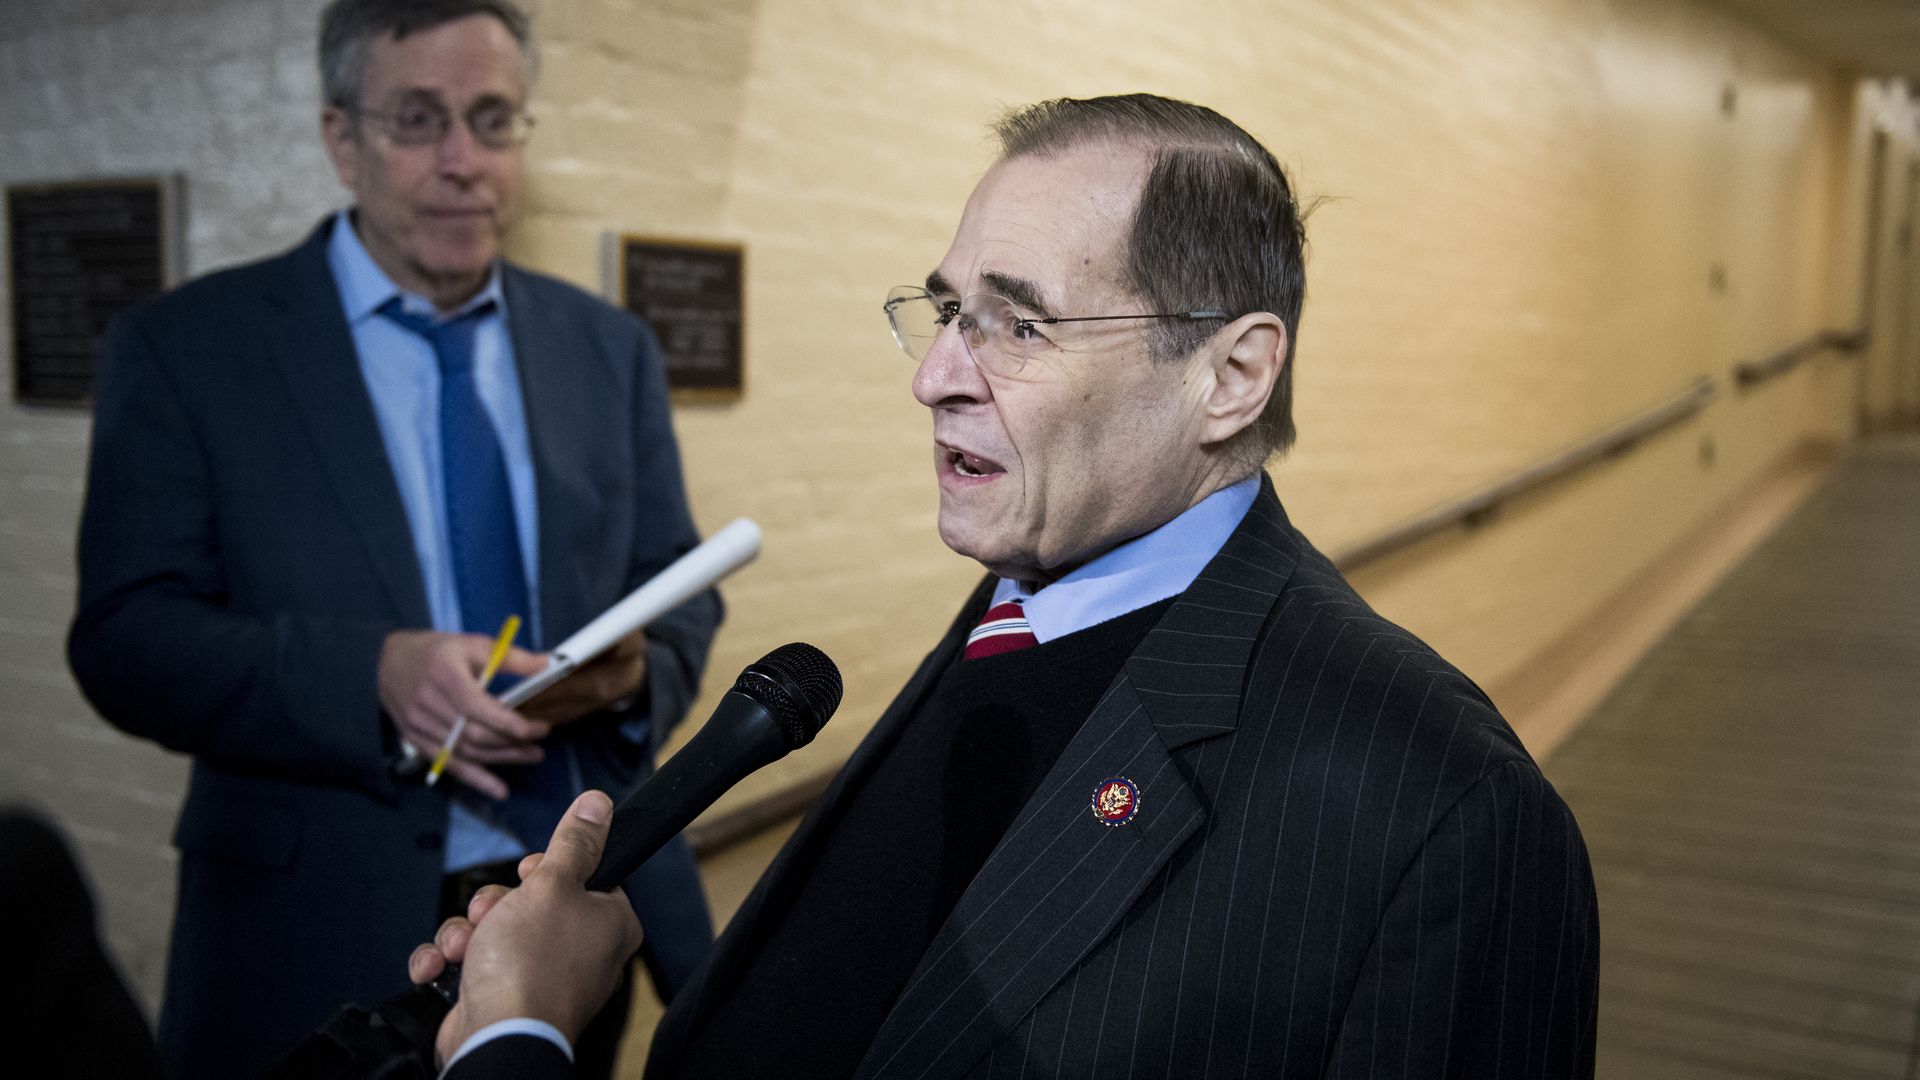 Rep. Jerrold Nadler (D-N.Y.), chairman of the House Judiciary Committee